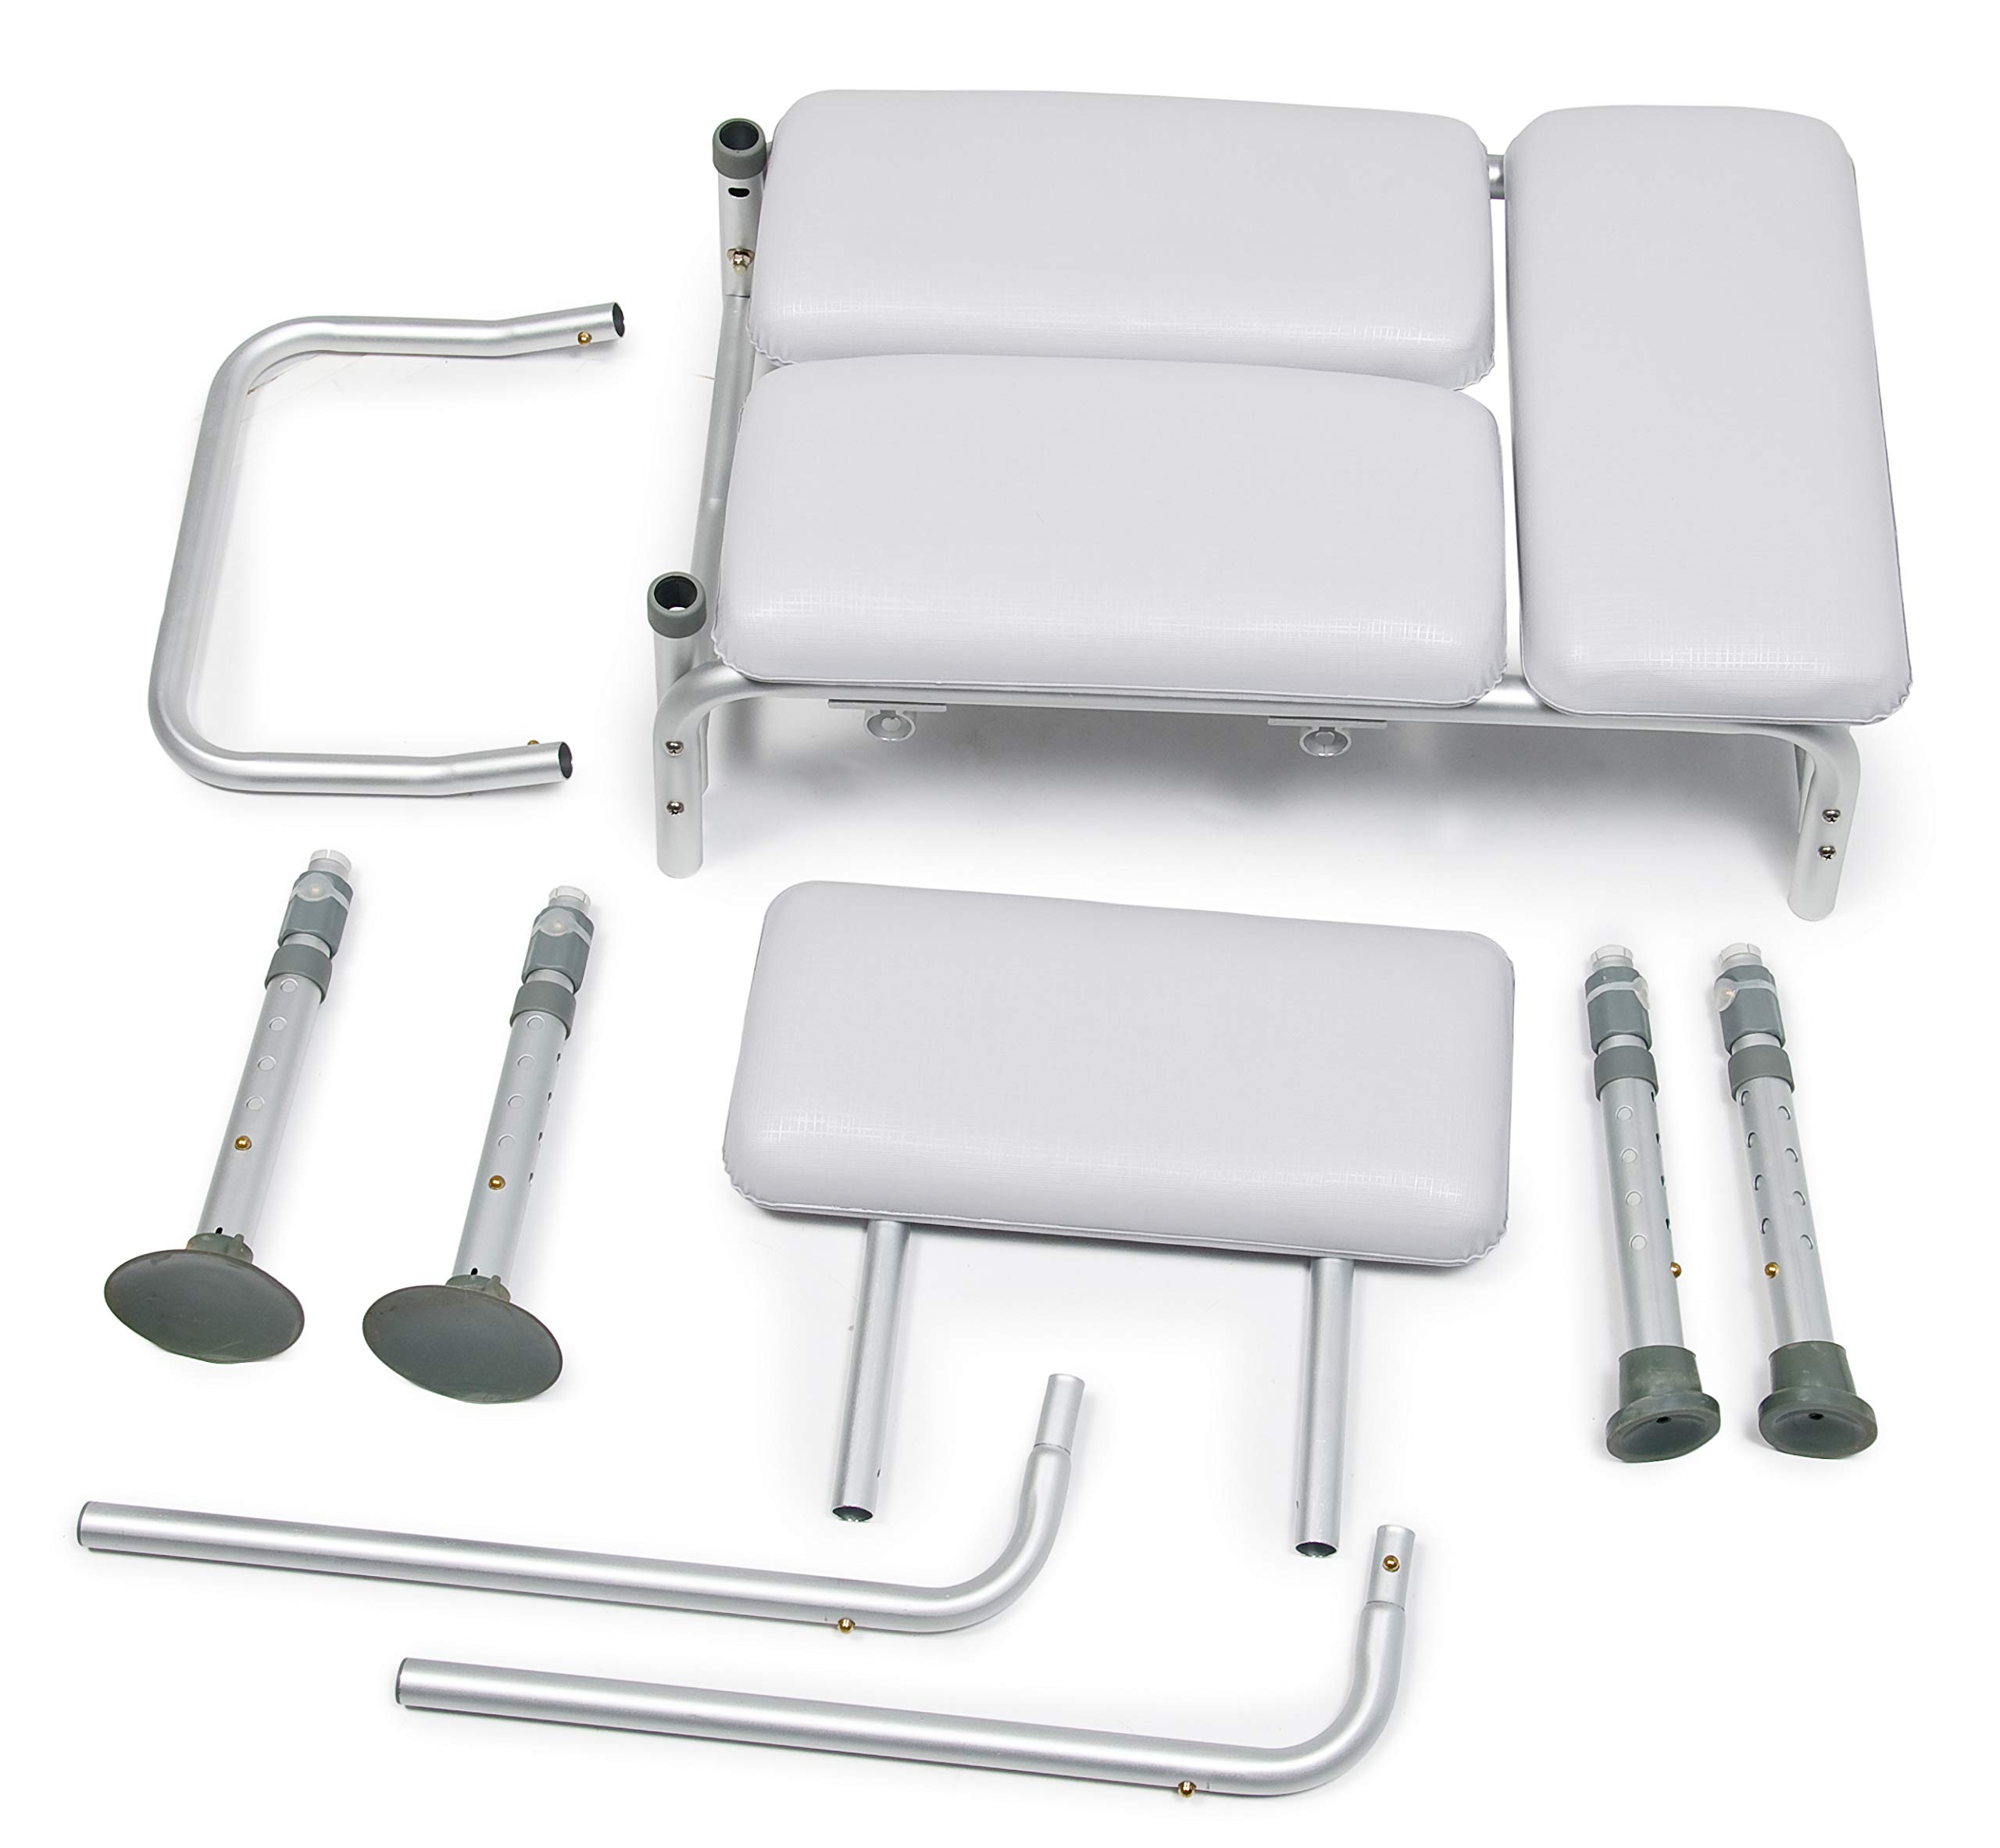 Graham-Field 7955KD-1 Lumex 2-in-1 Tub Transfer Bench & Shower Chair, Padded Seat & Backrest, Adjustable Height